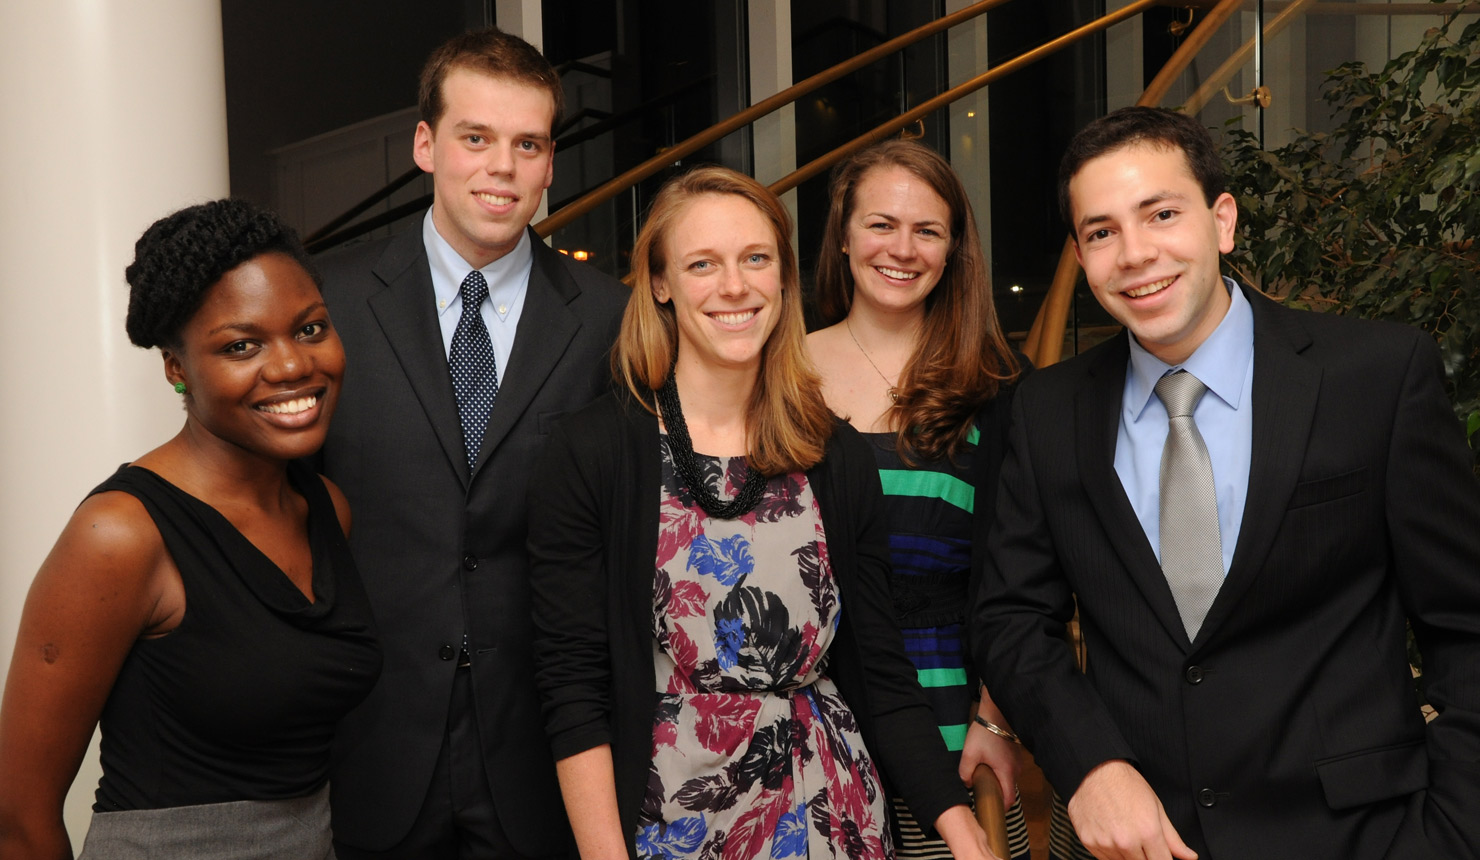 The 2014-2015 Syvertsen Scholars include (from left to right: Fadzai Chinyengtere, Ilya Bendich, Whitney Hitchcock, Sadie Marden, and Mazin T. Abdelghany, as well as Andre Koop, who is not pictured here.